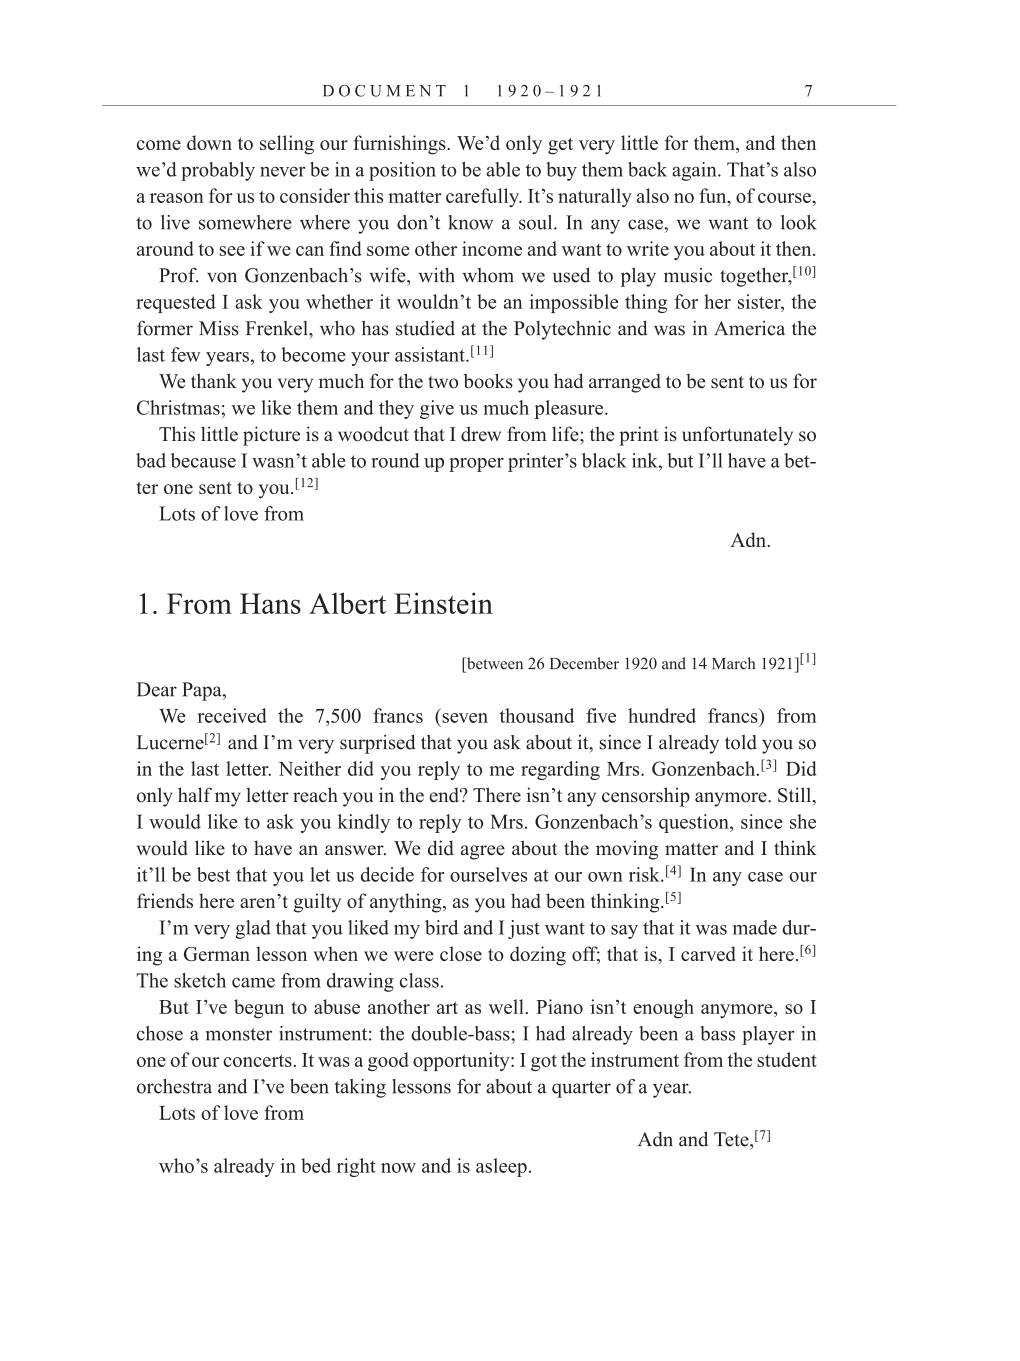 Volume 12: The Berlin Years: Correspondence, January-December 1921 (English translation supplement) page 7